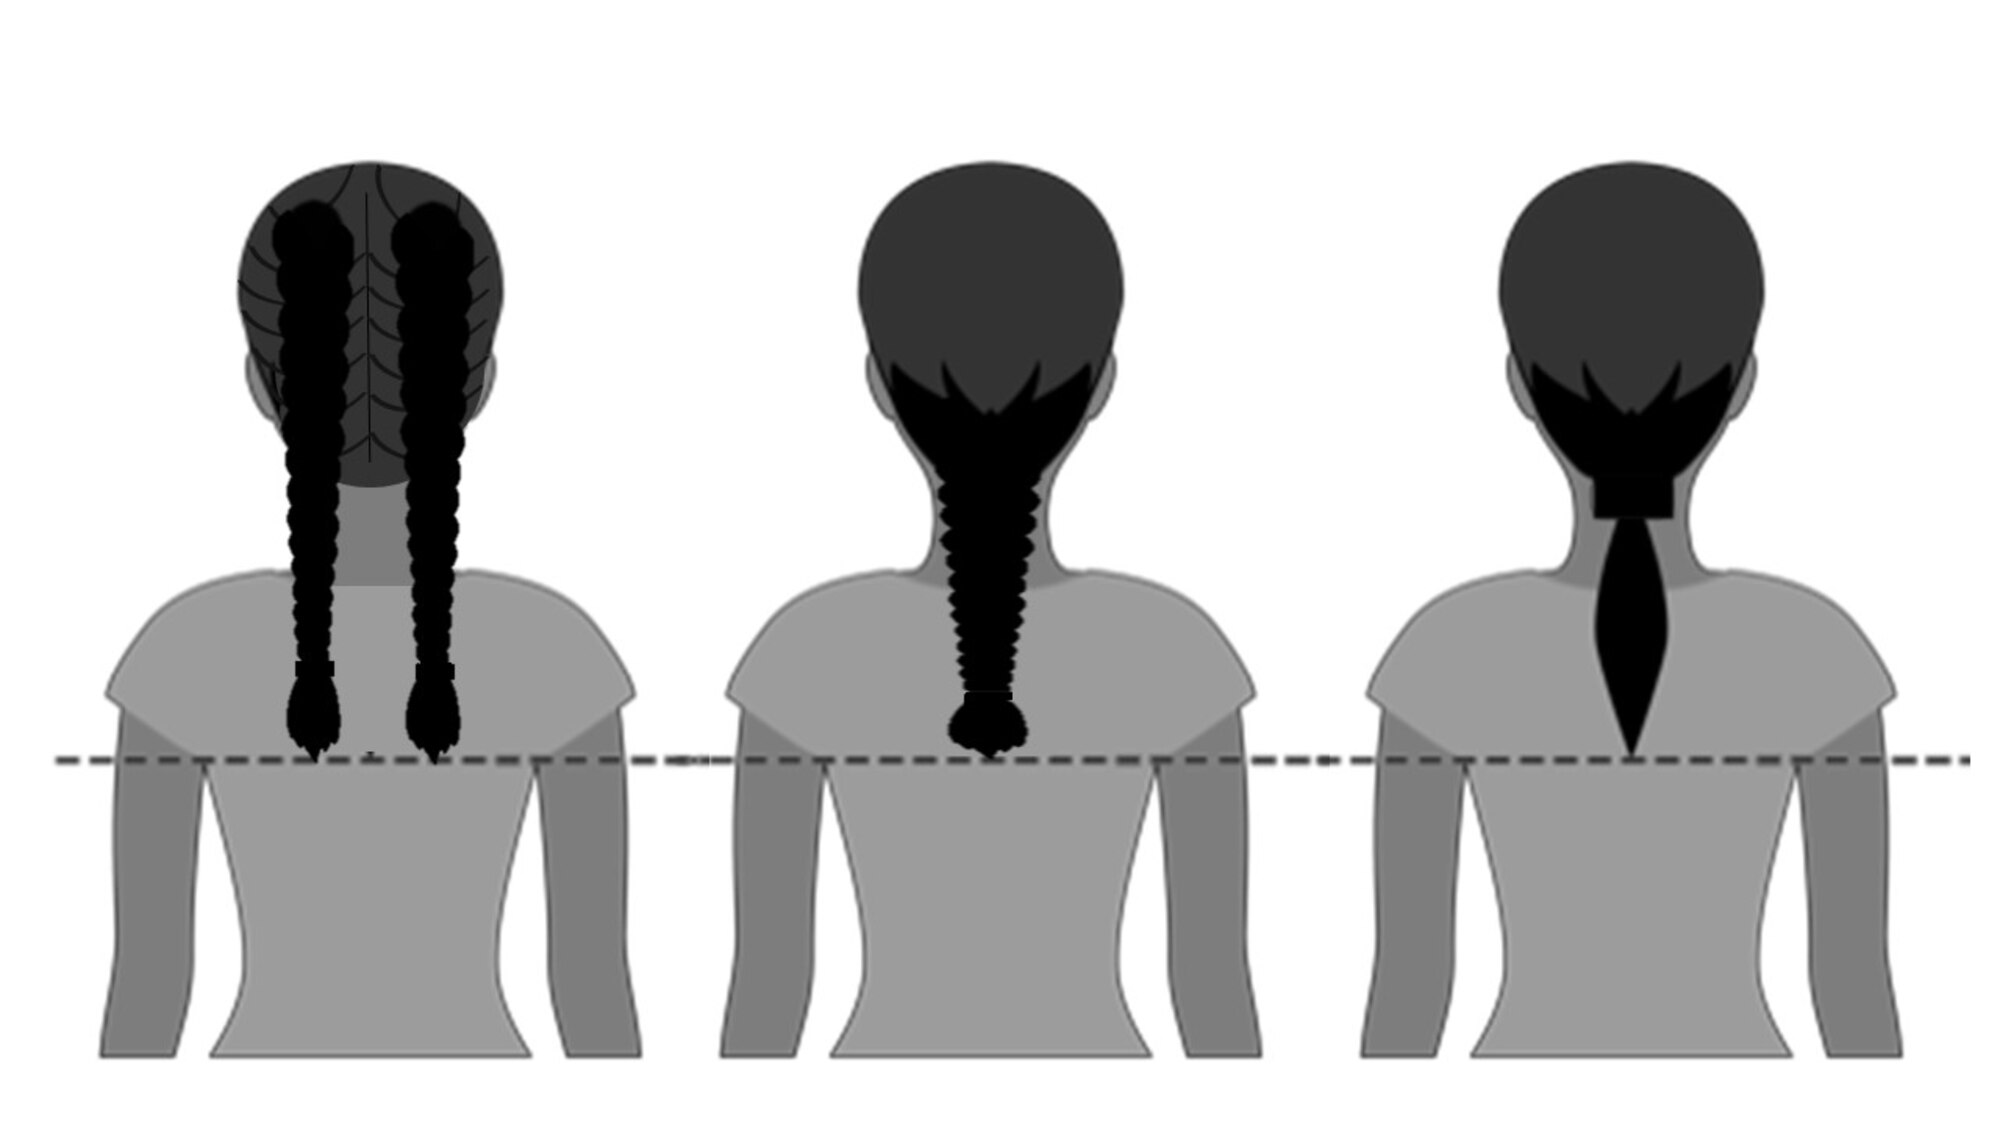 Upon publication of the new standards in Air Force Instruction 36-2903 in February, female Airmen will be able to wear their hair in up to two braids or a single ponytail with bulk not exceeding the width of the head and length not extending below a horizontal line running between the top of each sleeve inseam at the under arm through the shoulder blades. In addition, women’s bangs may now touch their eyebrows, but not cover their eyes. (Courtesy graphic)